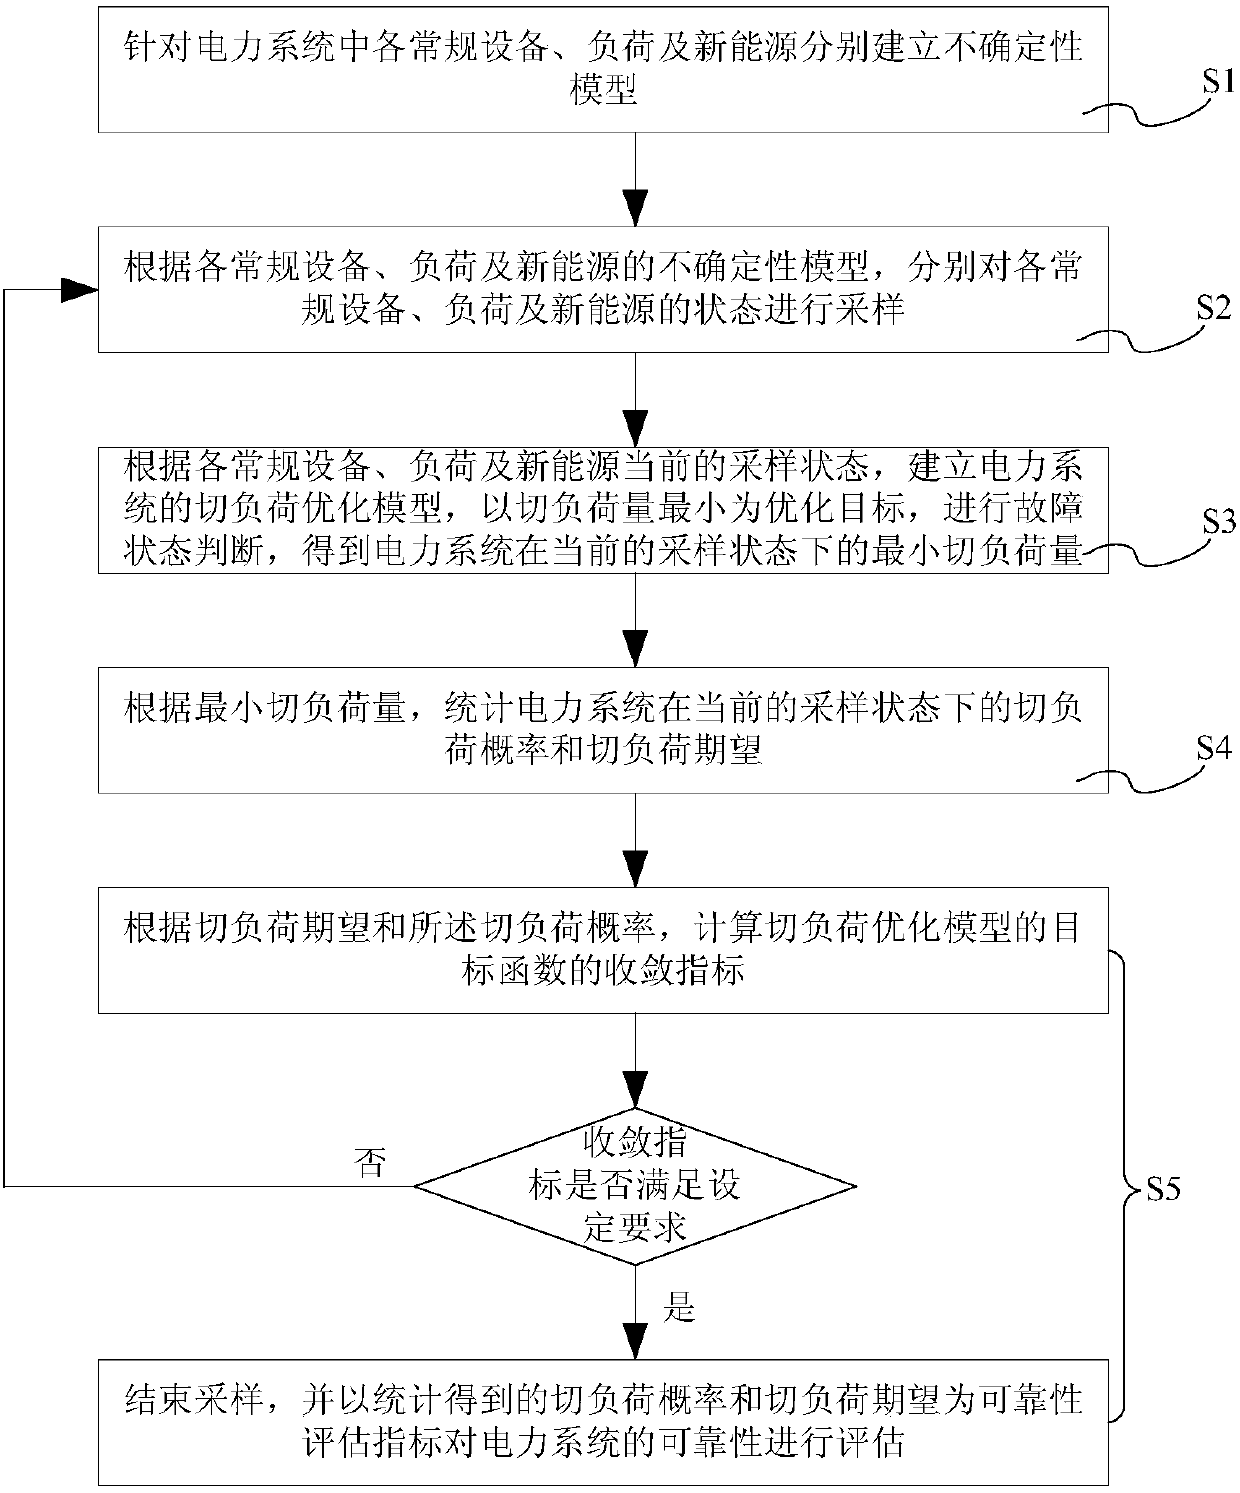 Method for evaluating reliability of power system accessing new energy